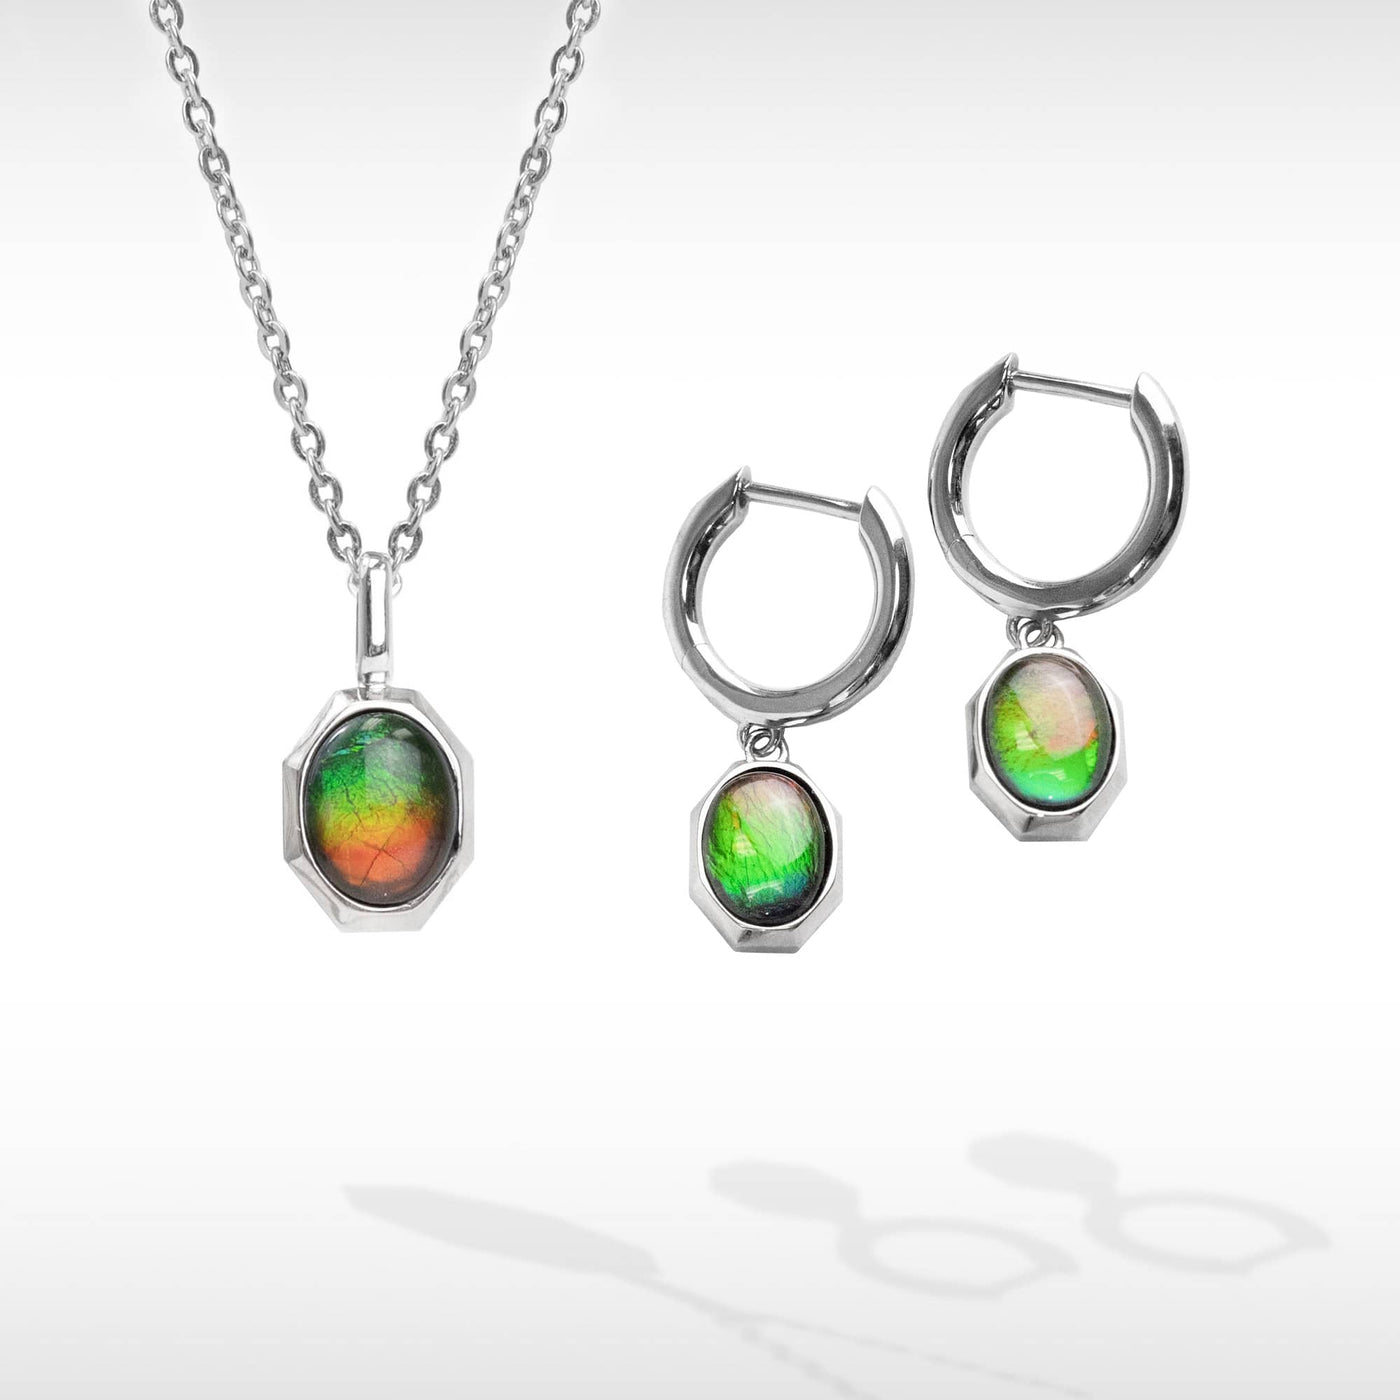 Essentials Oval Ammolite Pendant and Earrings Set in Sterling Silver